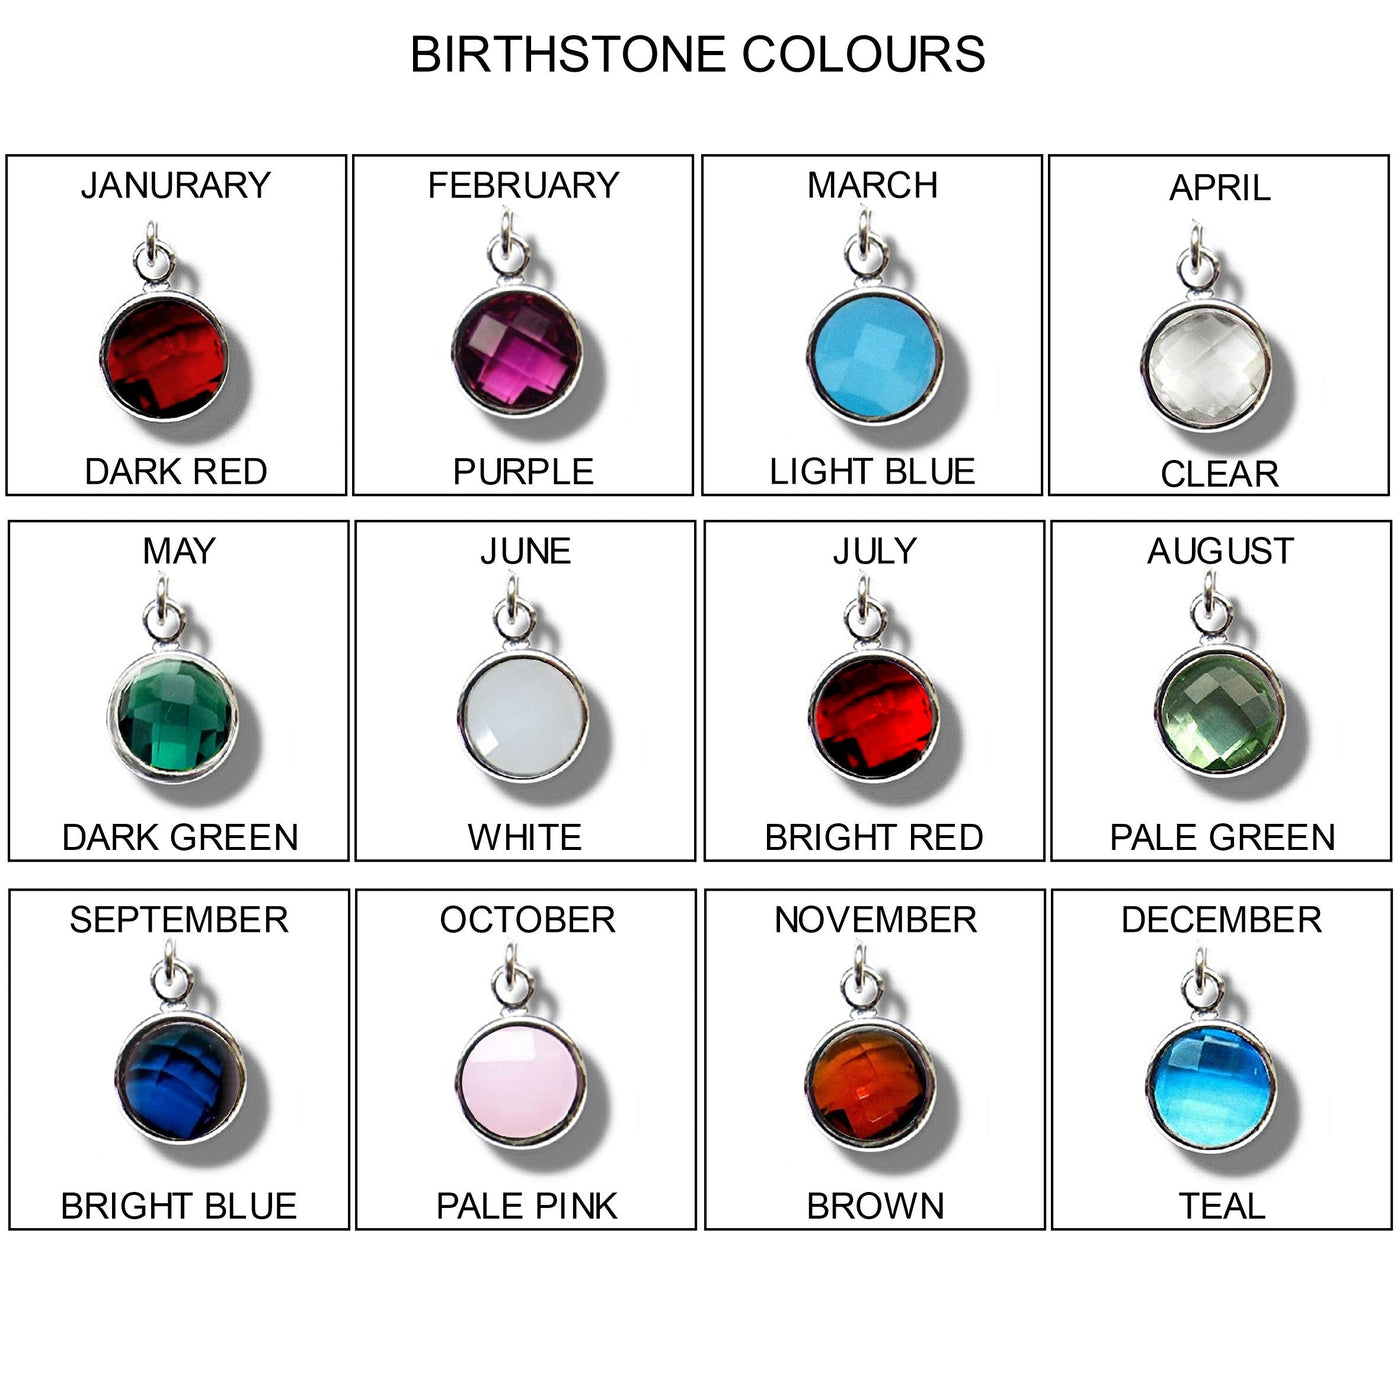 Personalised Birthstone Star Necklace